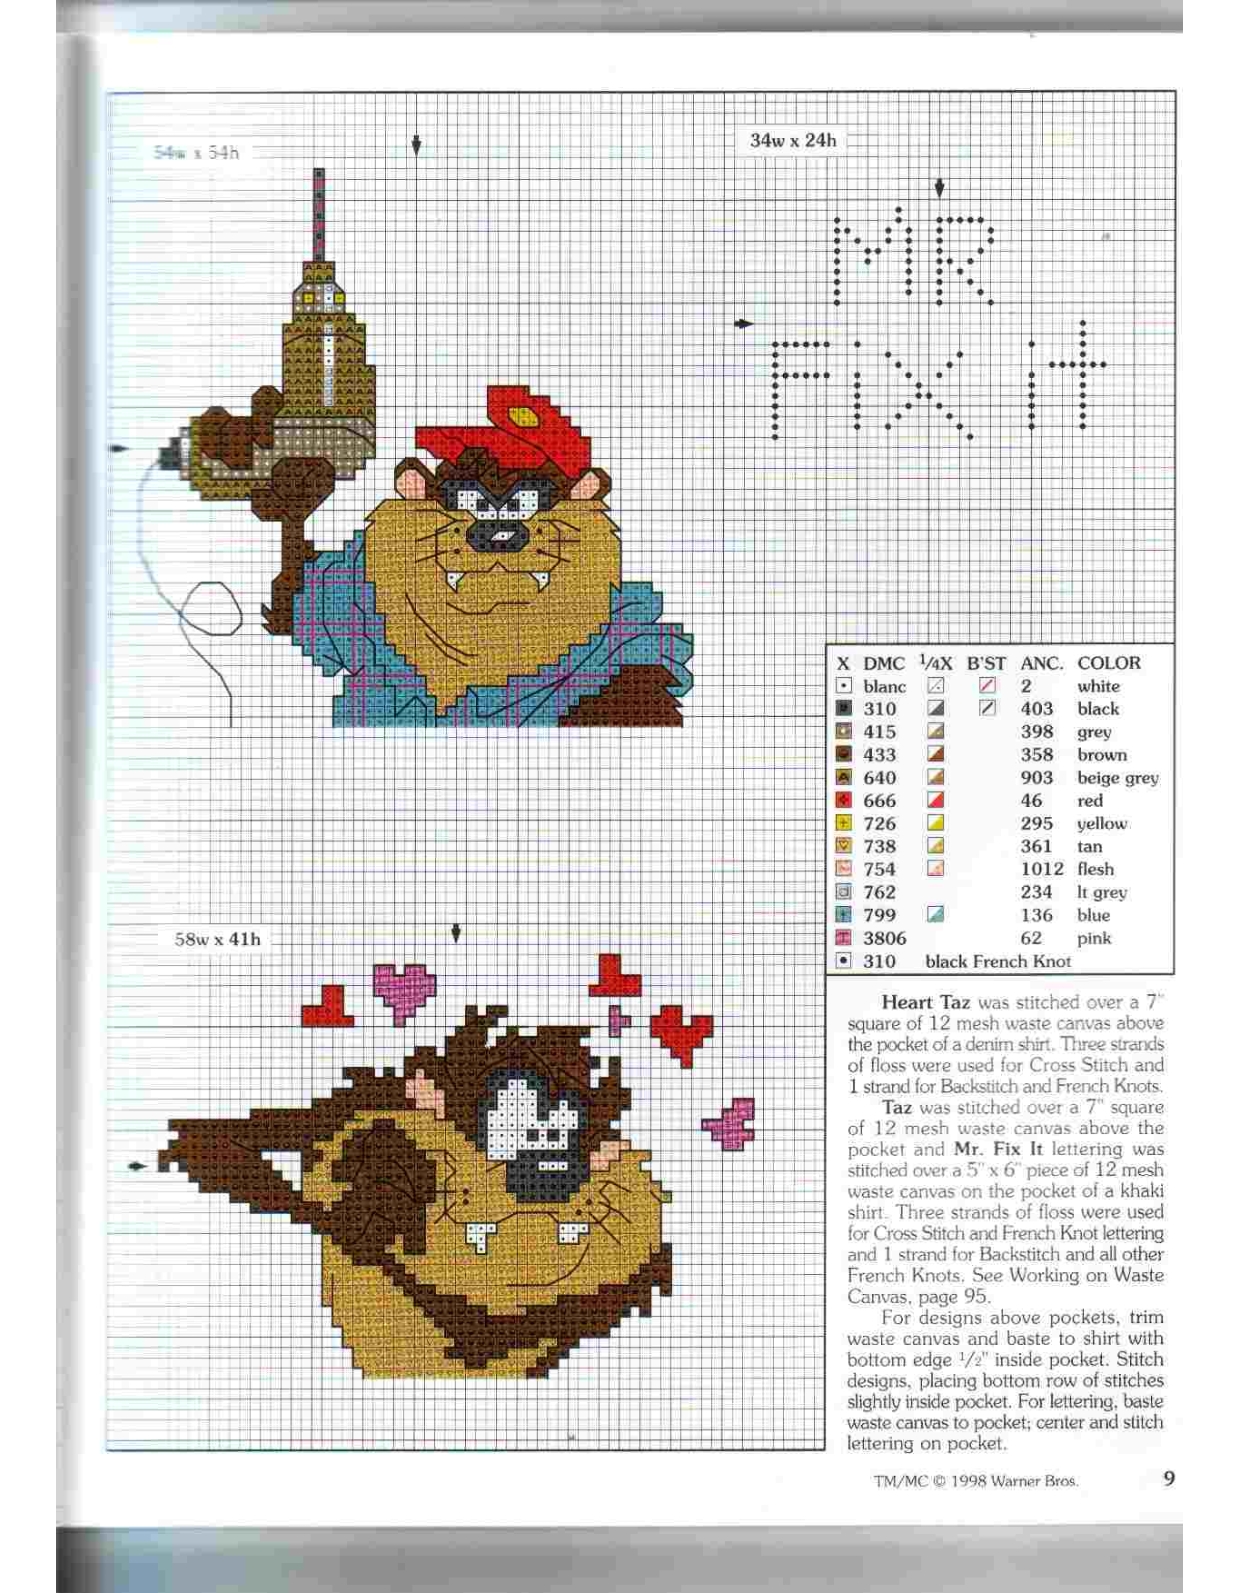 Cross stitch patterns with Taz from Looney Tunes